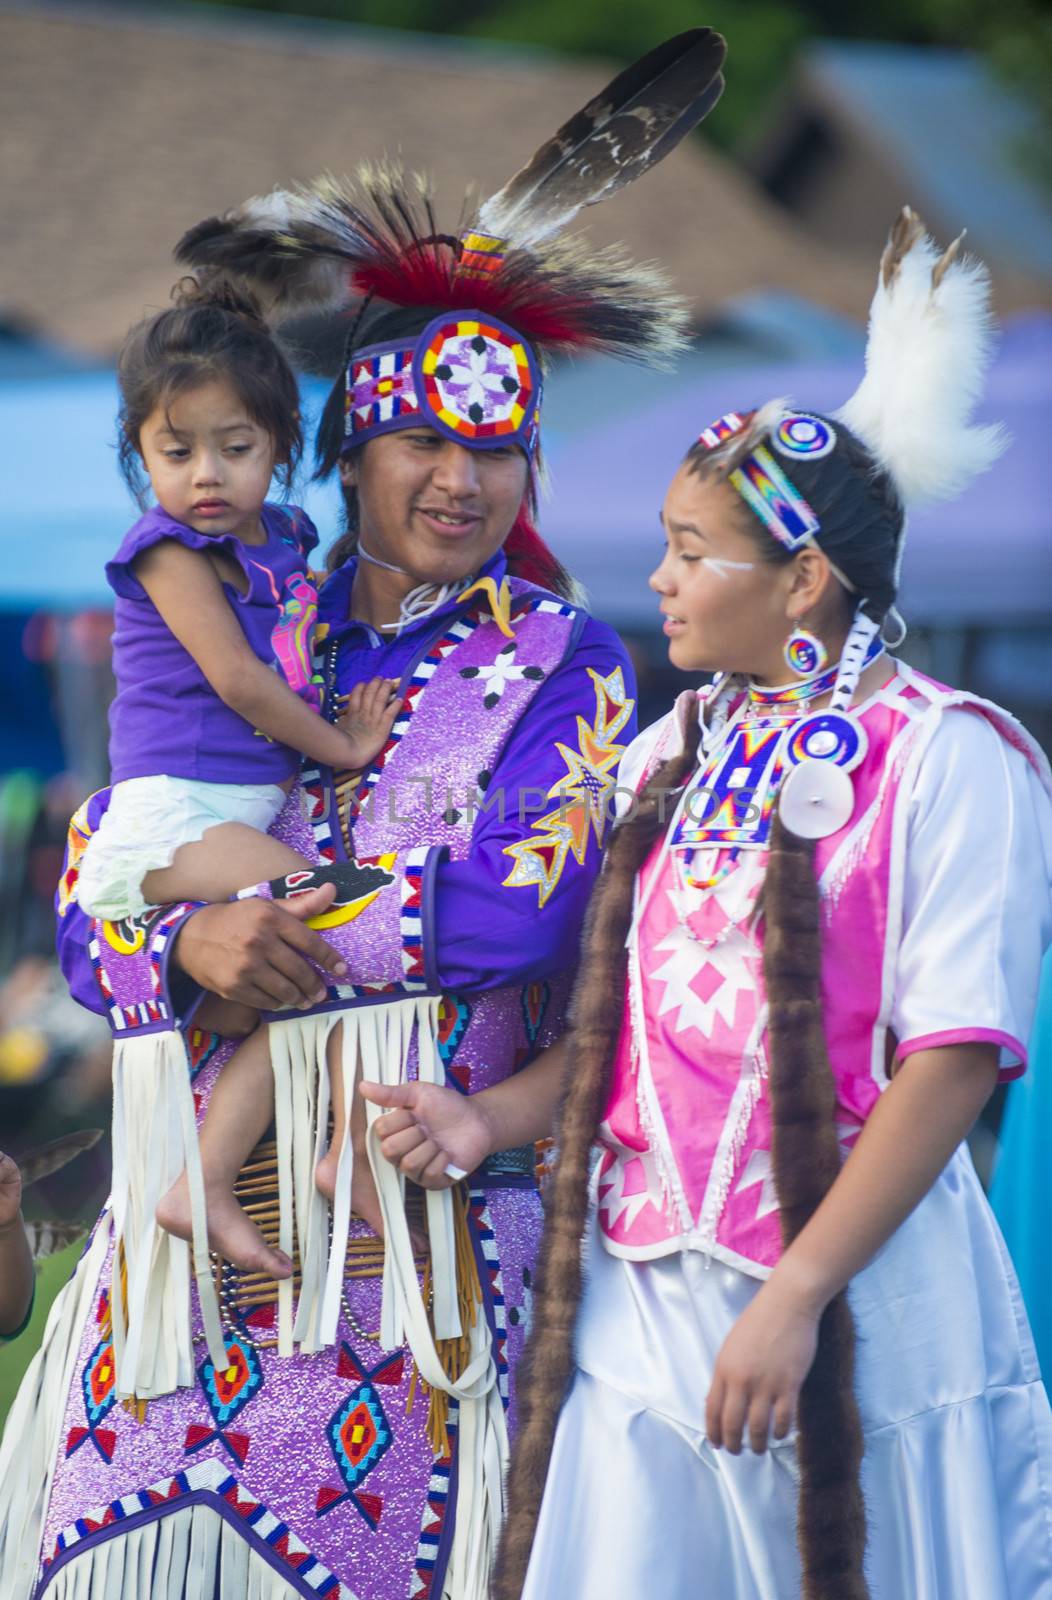 MARIPOSA ,USA - MAY 11 : An unidentified Native Indian family takes part at the Mariposa 20th annual Pow Wow in California , USA on May 11 2013 ,Pow wow is native American cultural gathernig event.